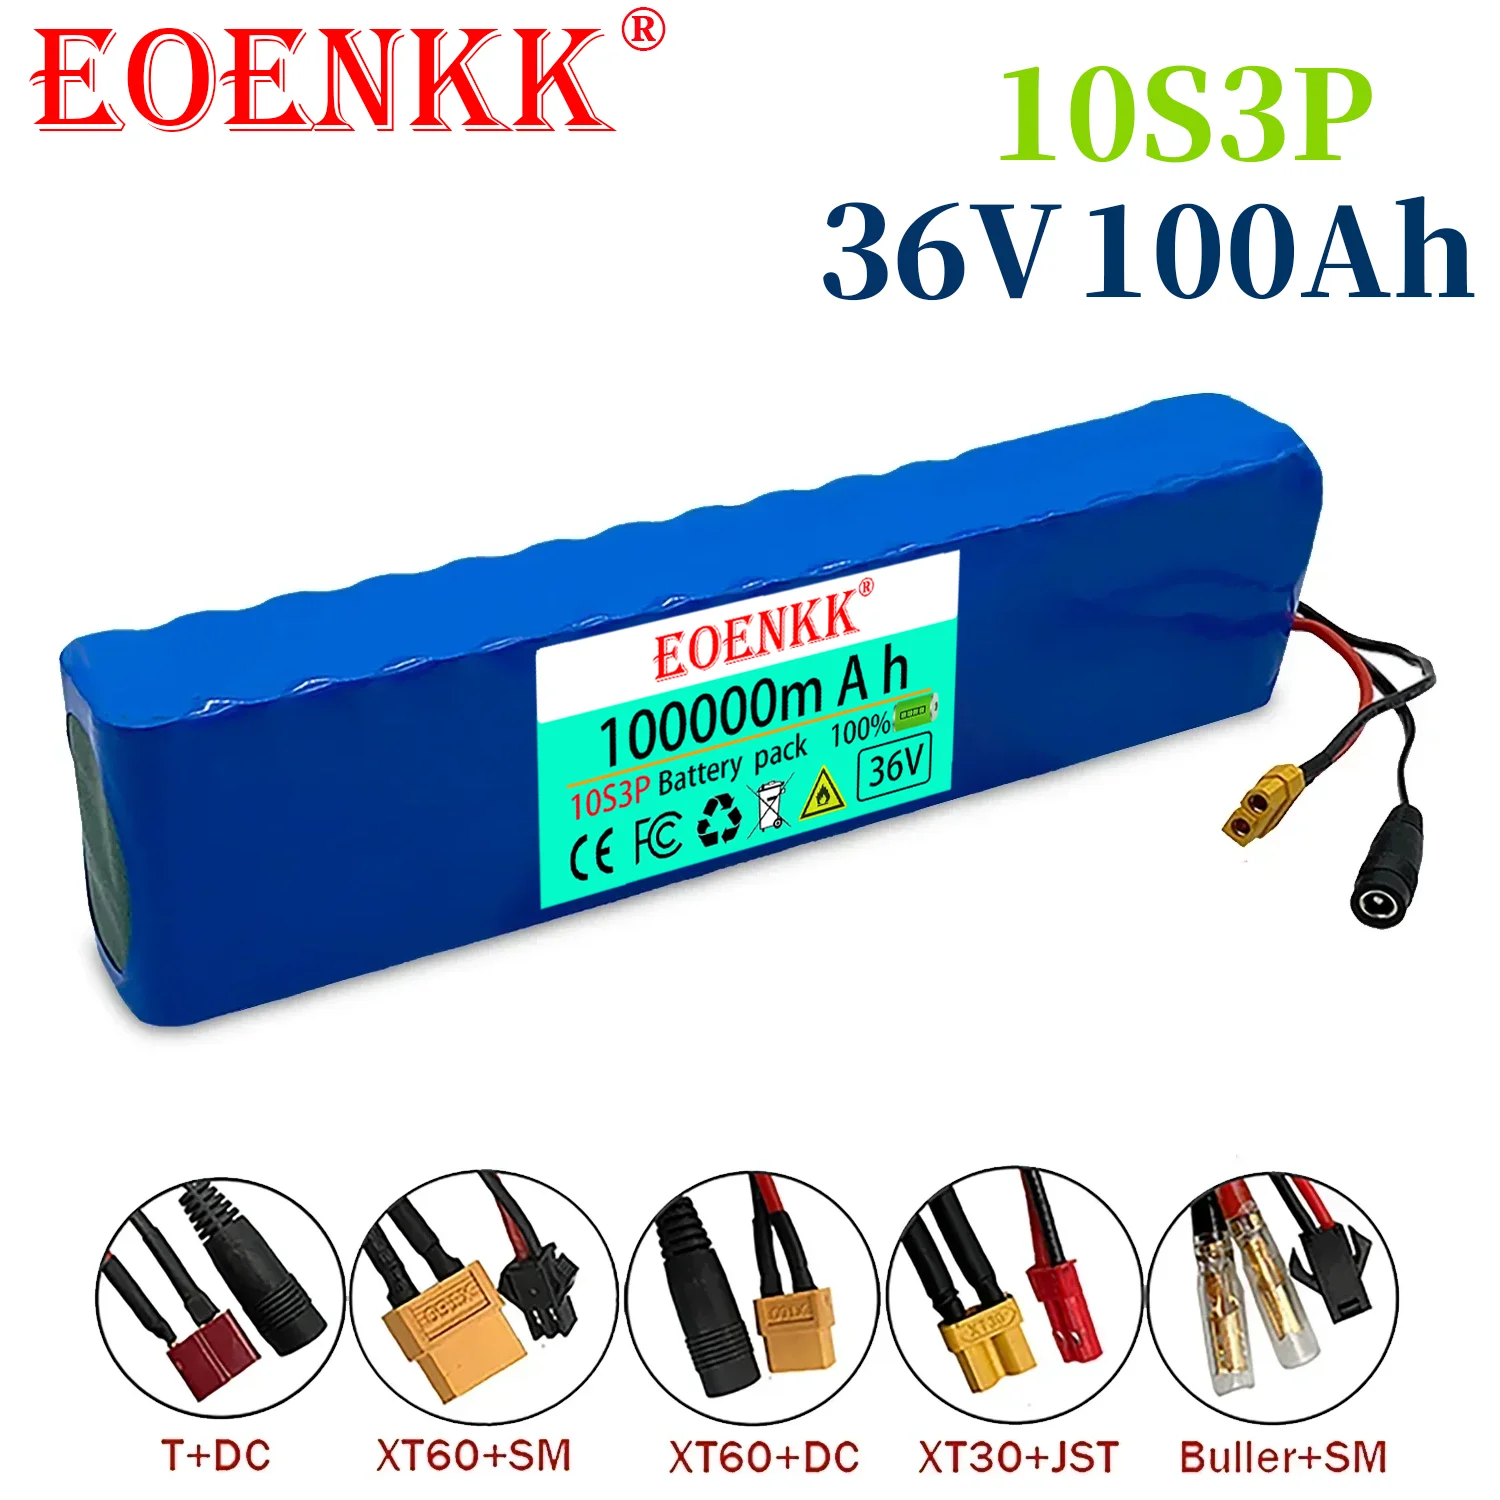 

EOENKK 36V 100ah 18650 lithium battery 10s3p 100000mah 1000w 42V electric scooter power battery with battery pack